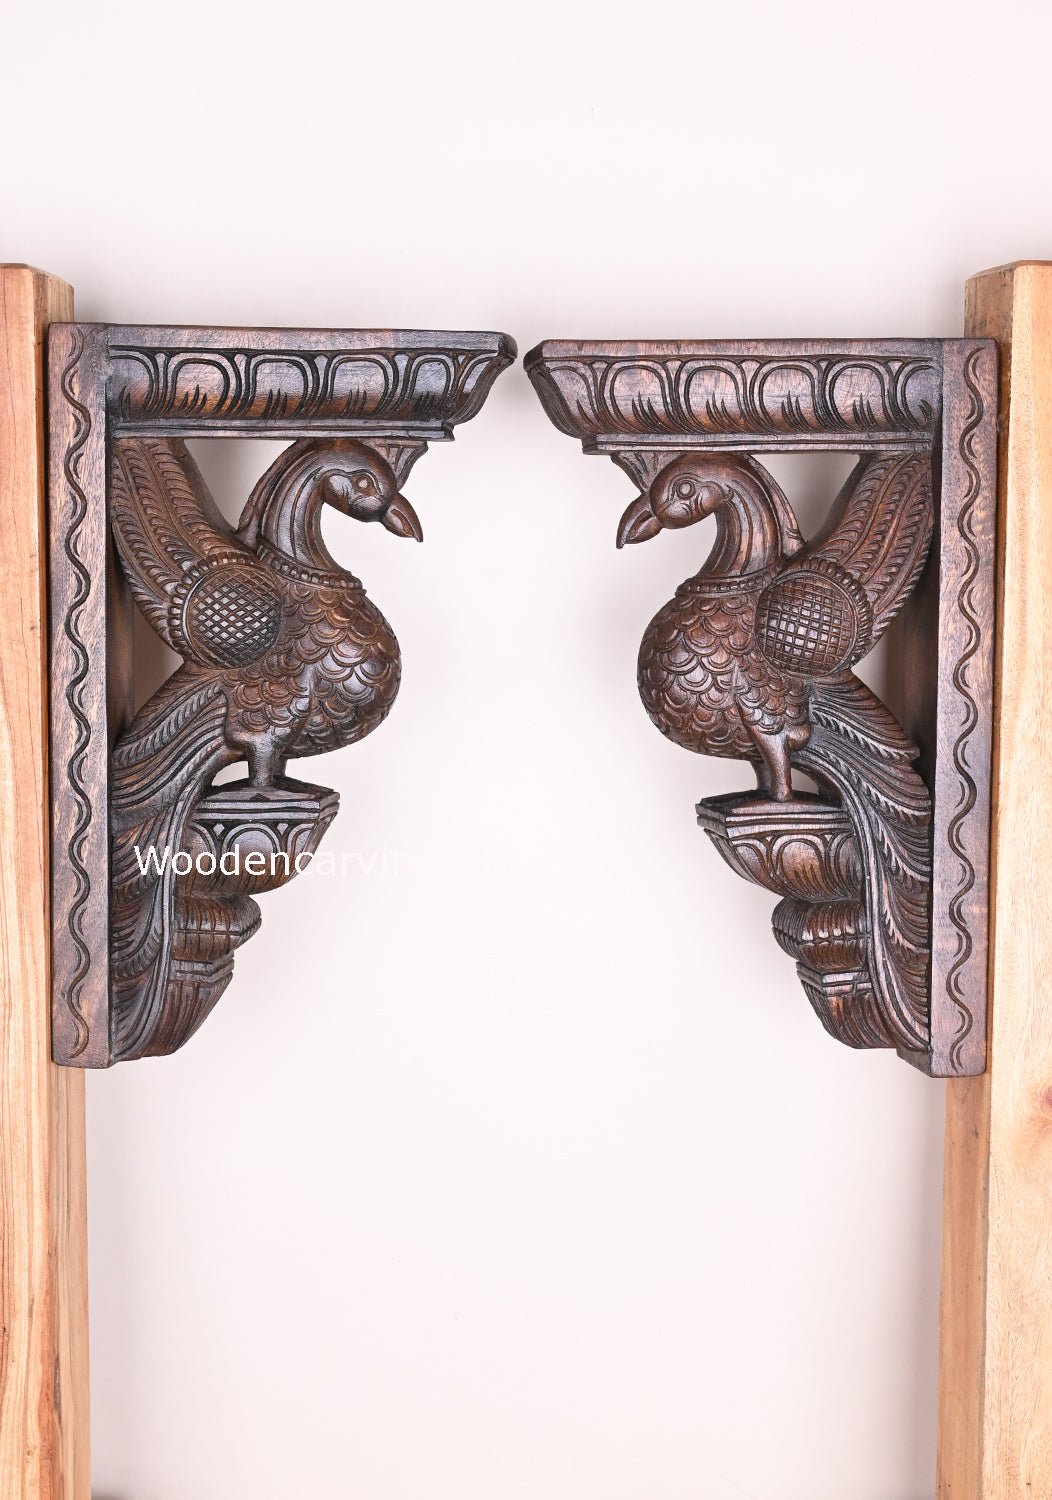 Unique Standing Parrots Ready to Fly on Sky Wooden Handmade Paired Wall Brackets 17"